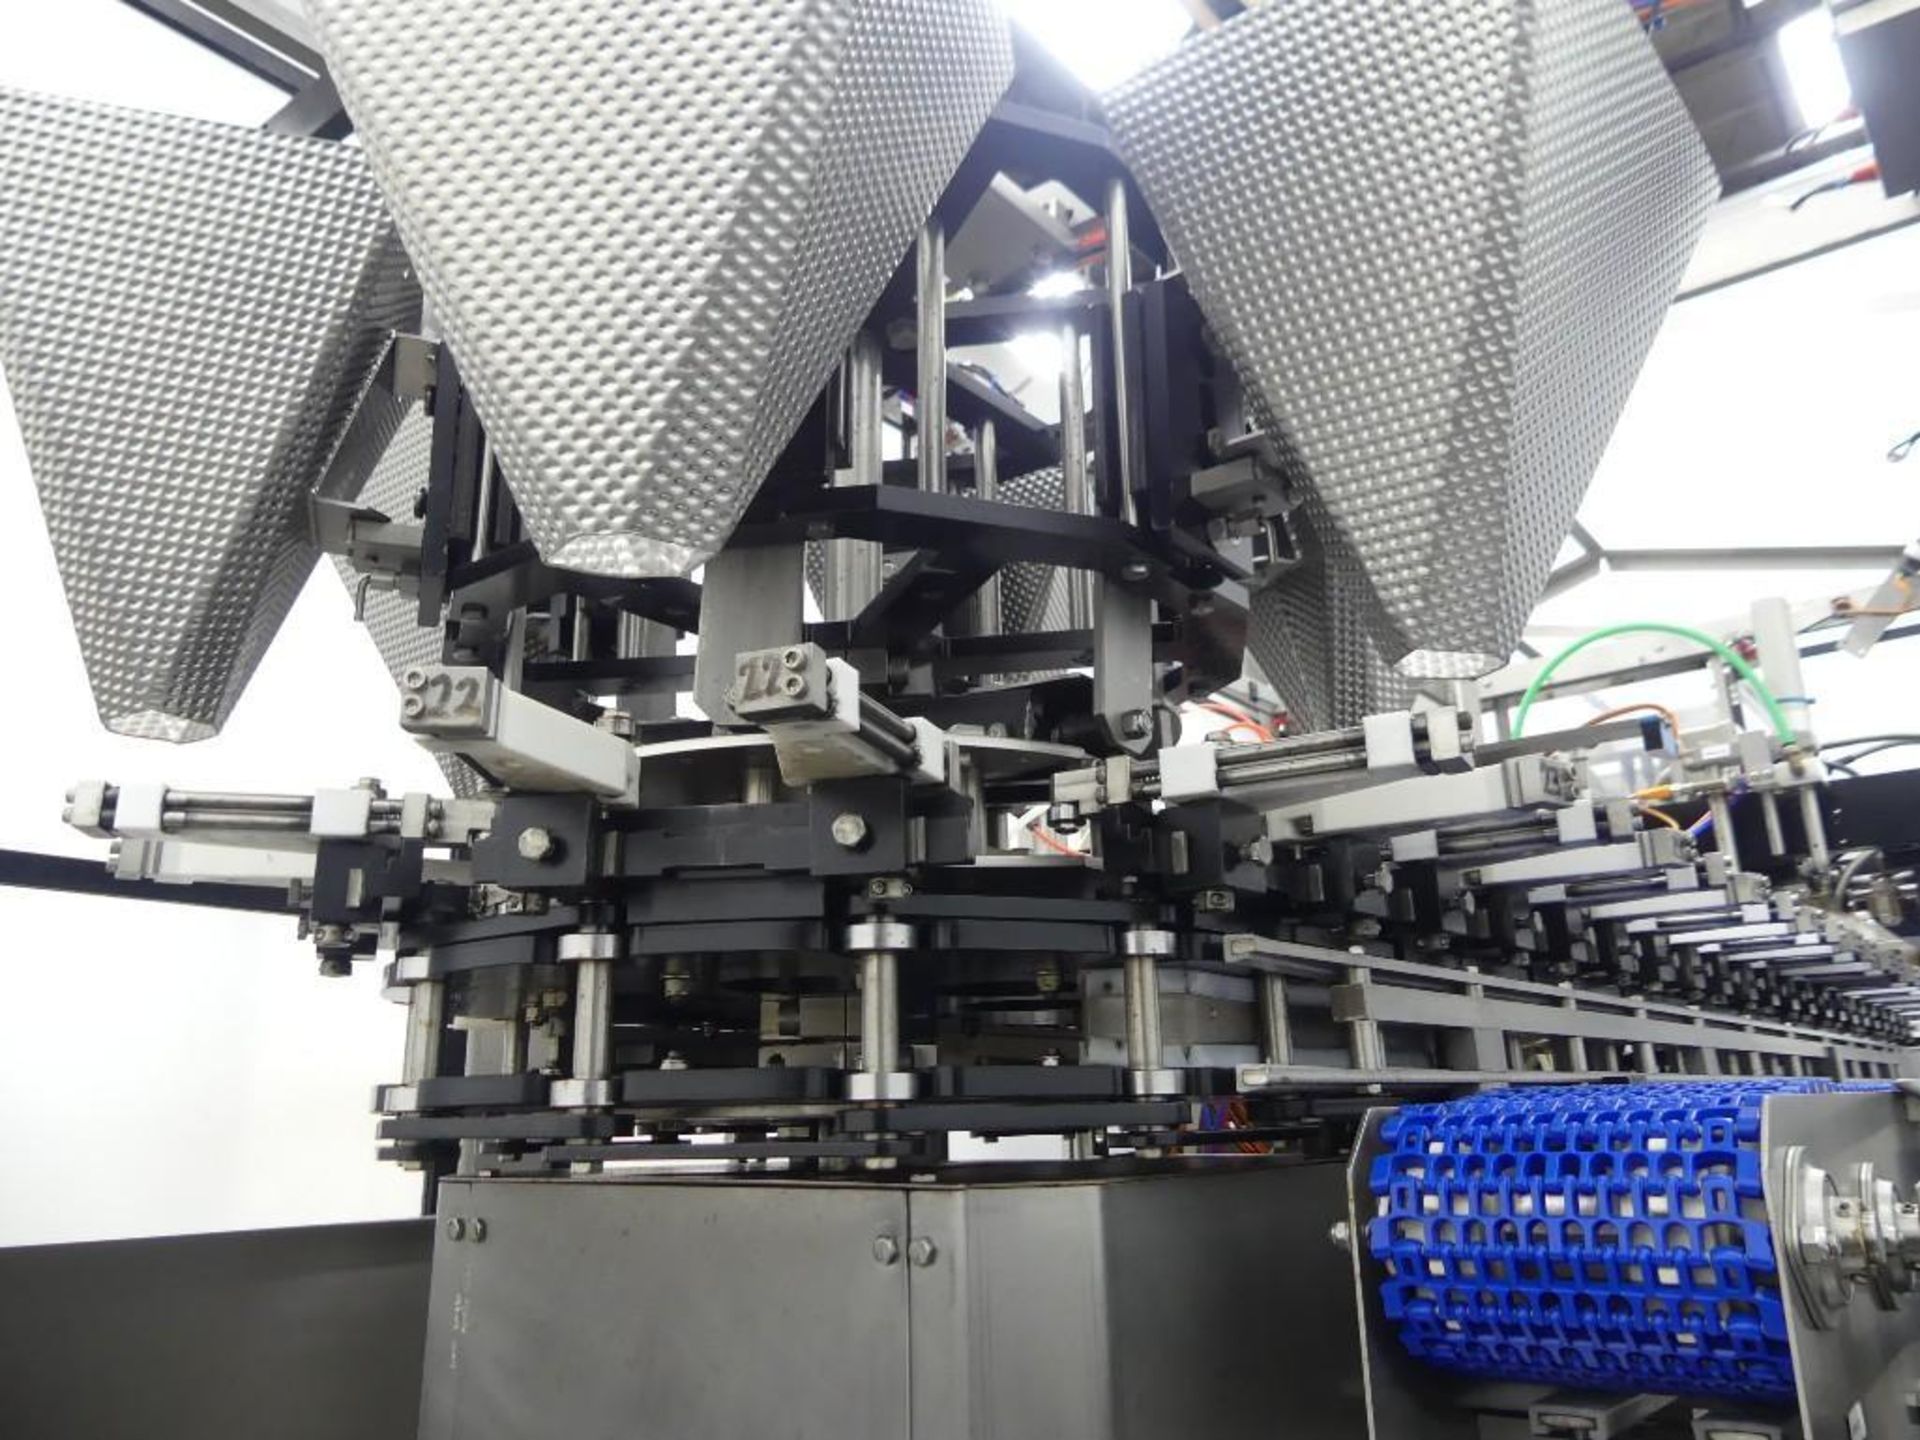 Massman HFFS-IM1000 Flexible Pouch Packaging System - Image 35 of 127